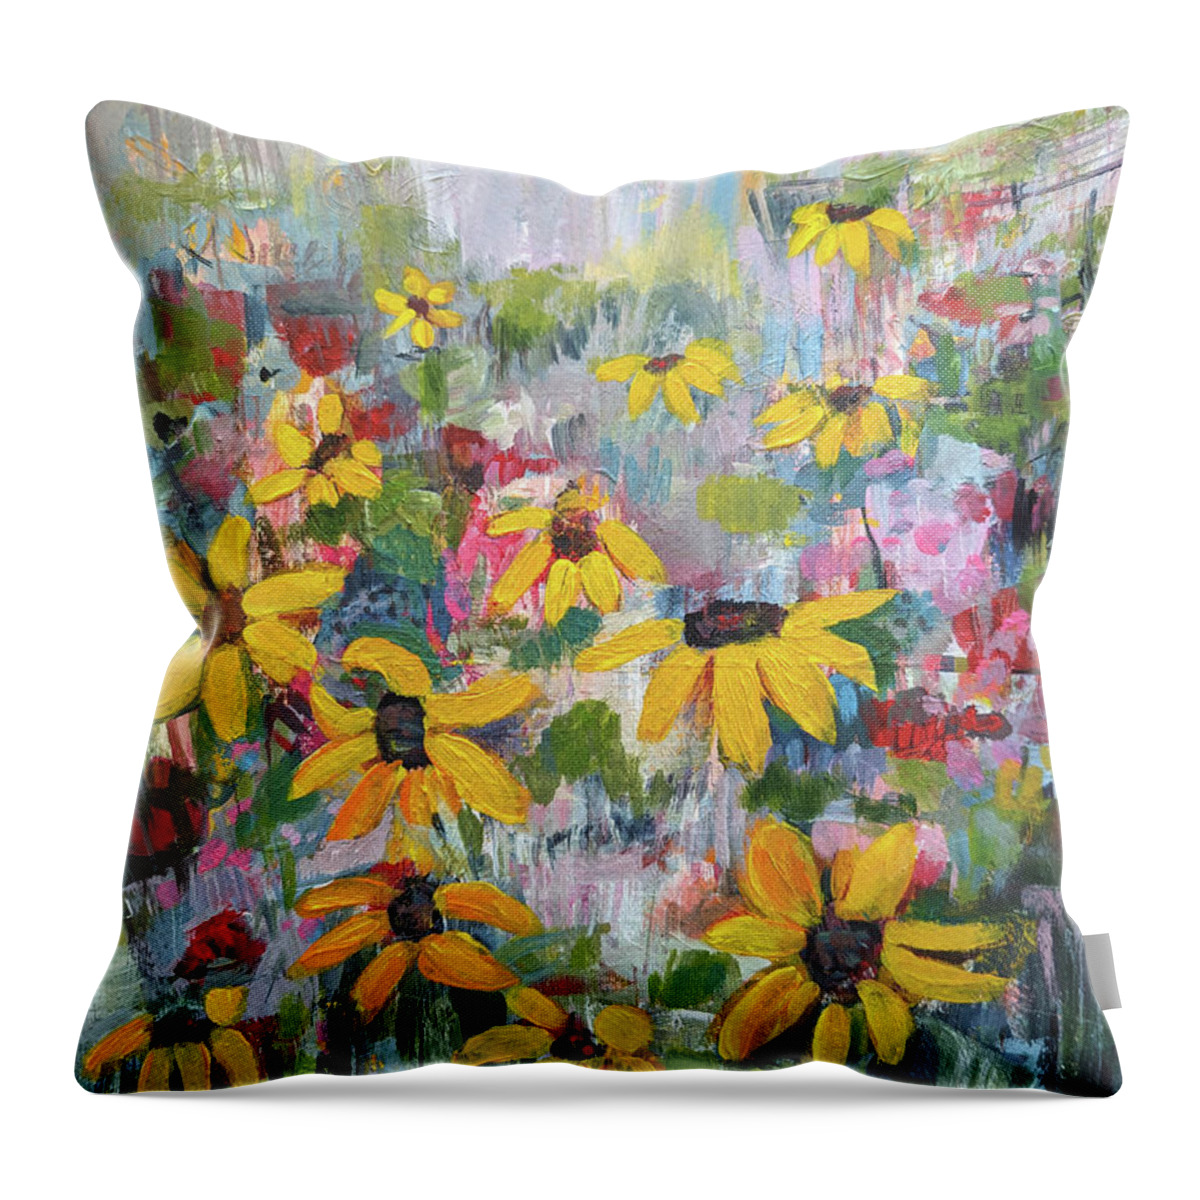 Sunflower Paintings Throw Pillow featuring the painting Sunflowers Farm by Haleh Mahbod